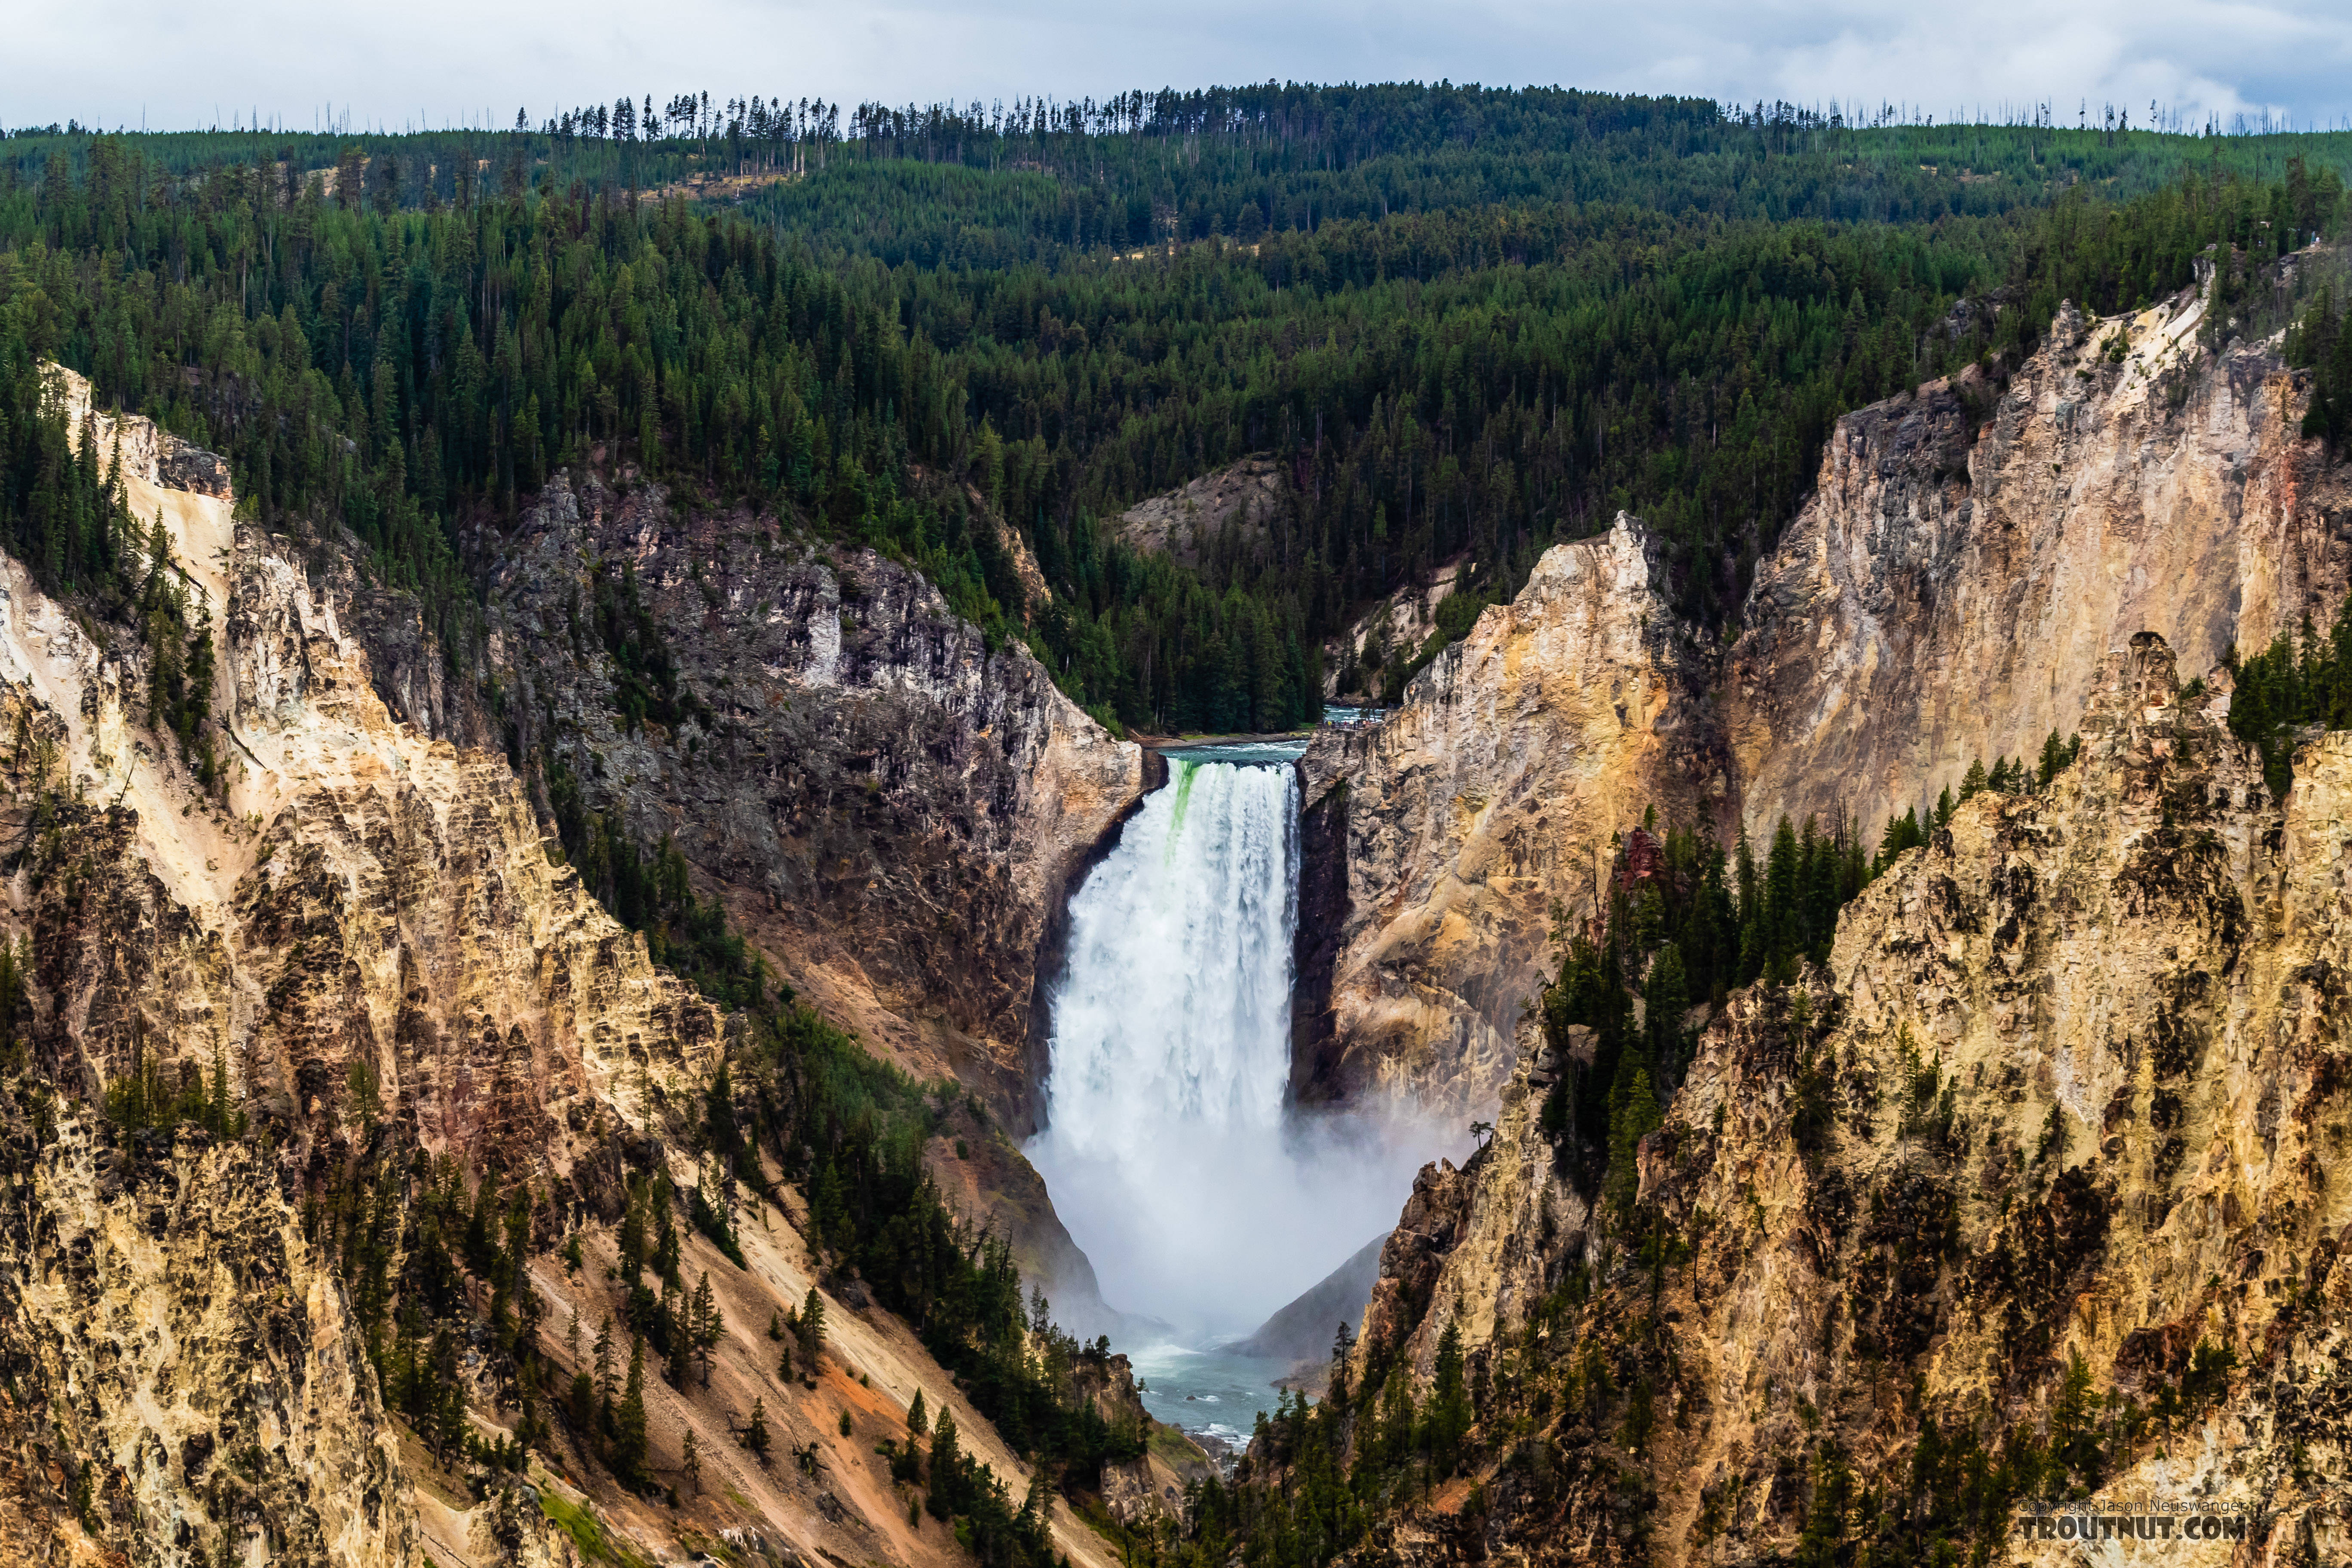 The main waterfall at the head of the Grand Canyon of the Yellowstone From the Yellowstone River in Wyoming.